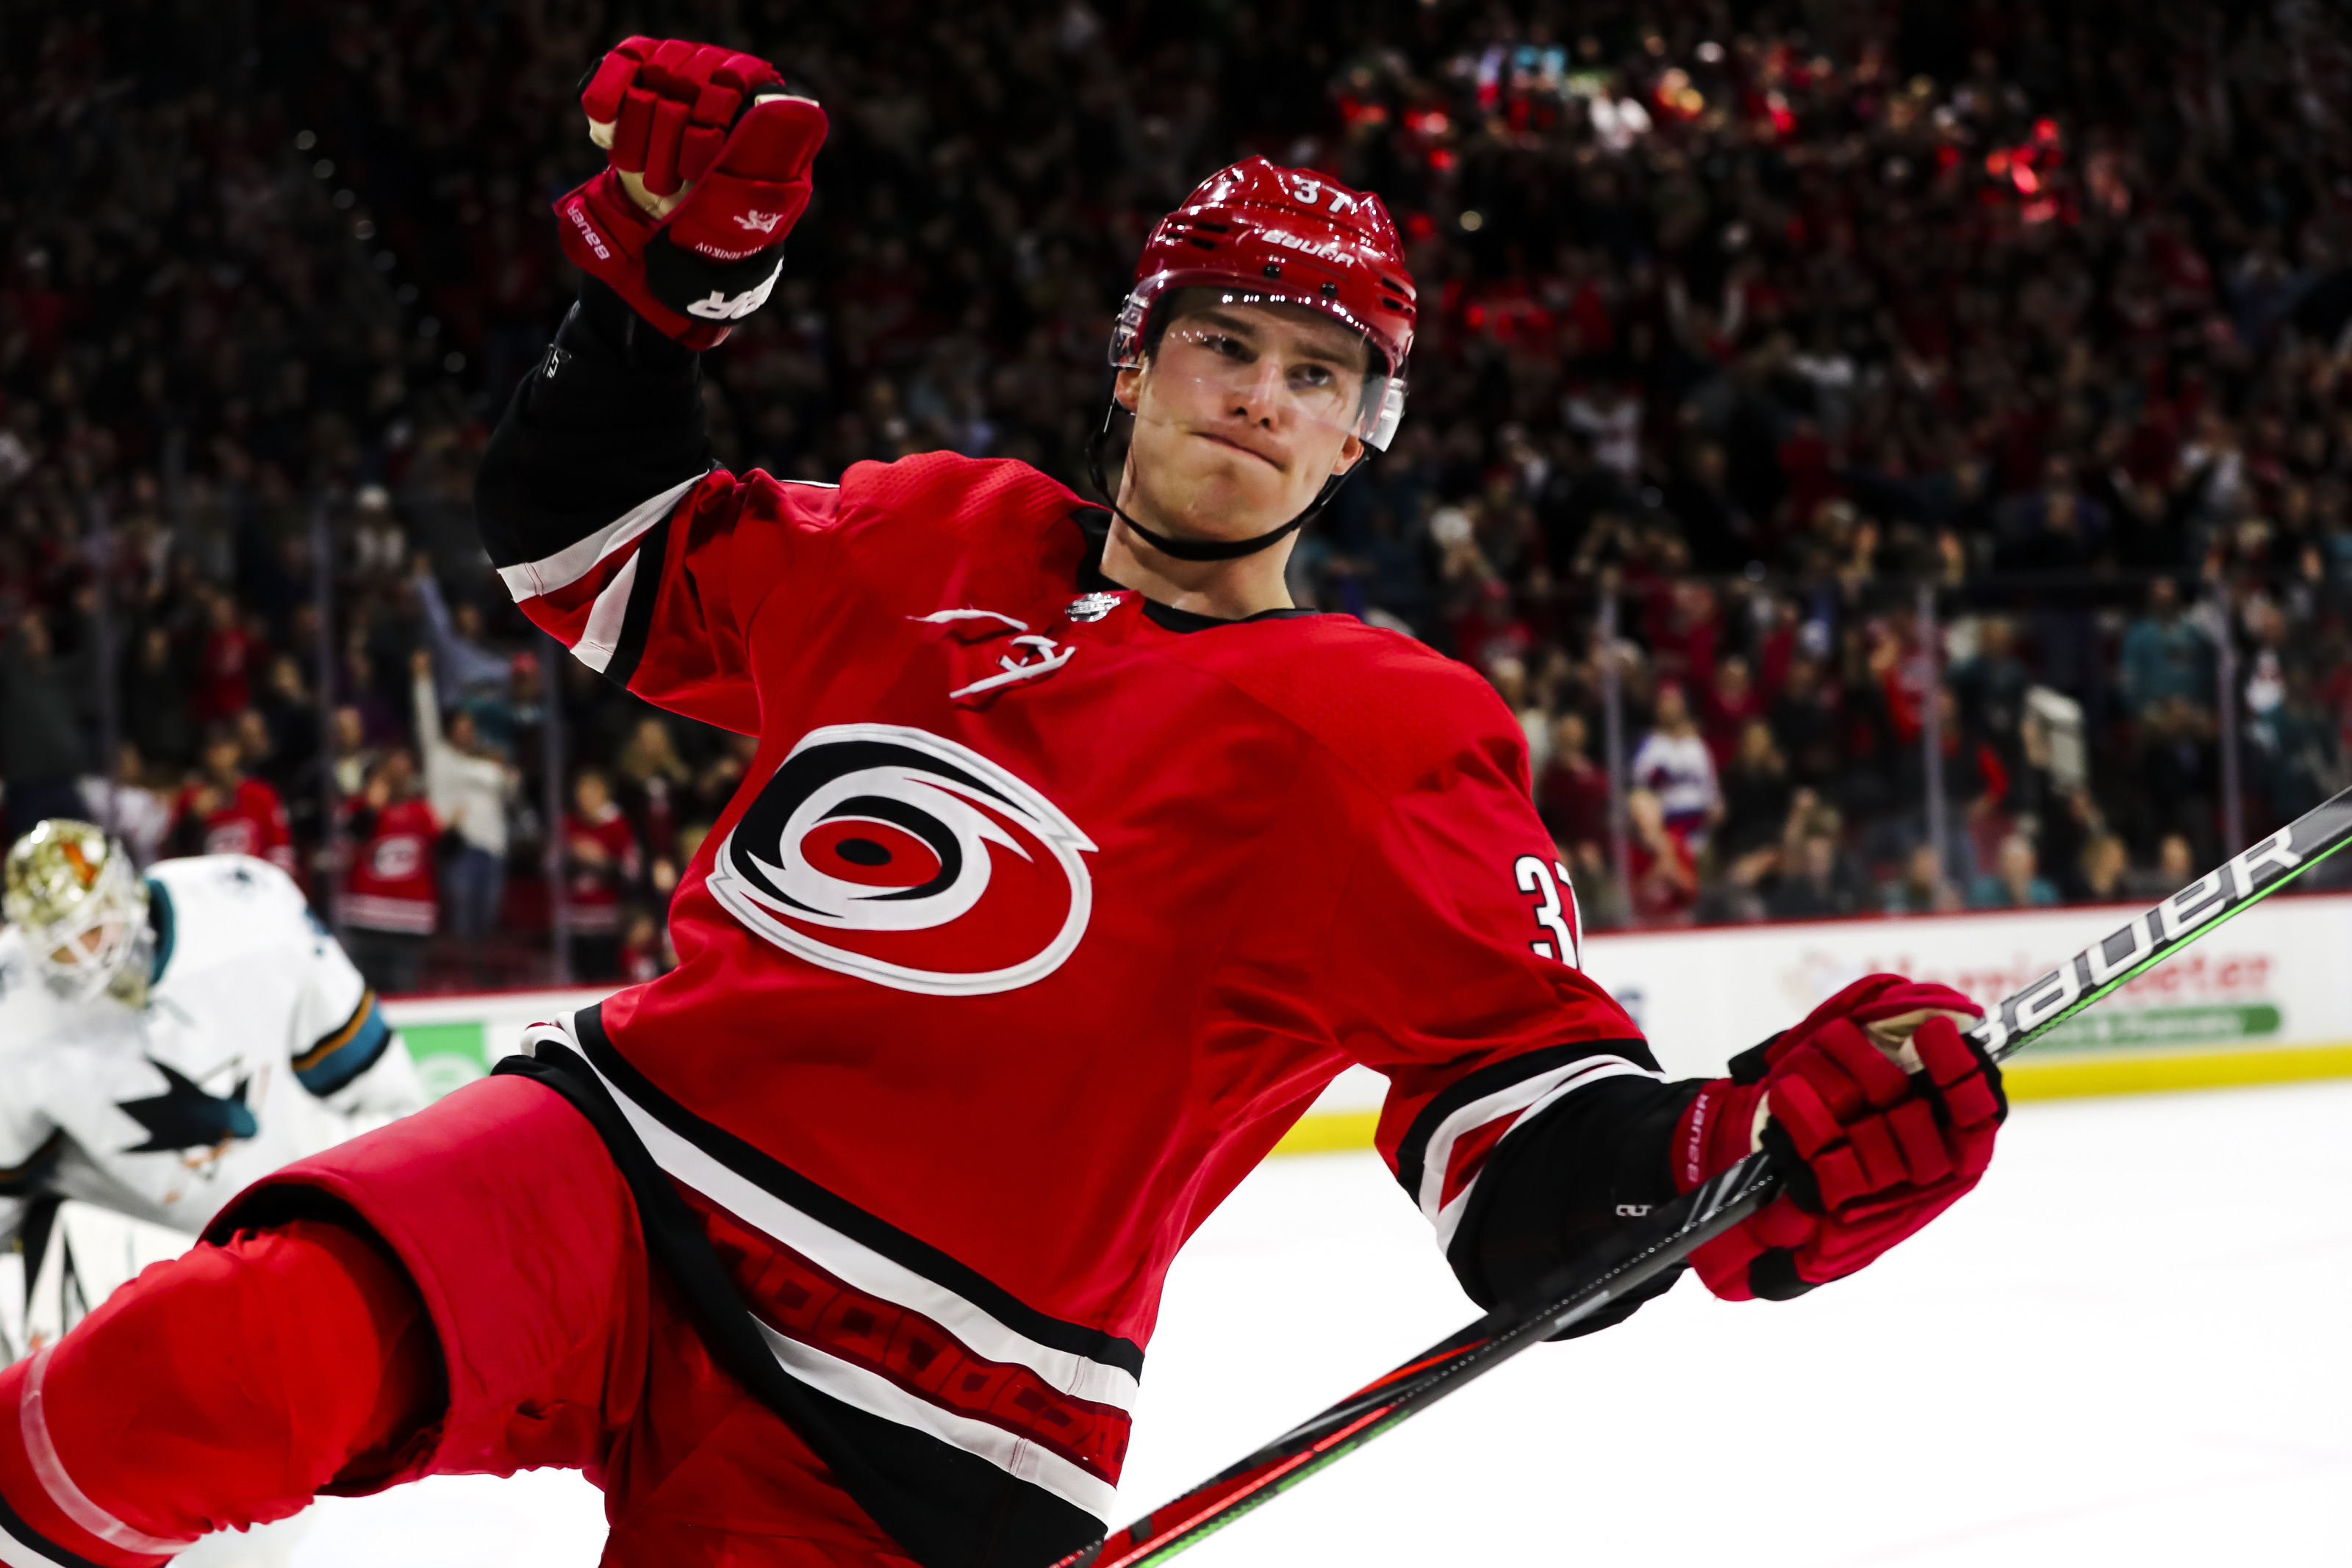 Hurricanes, Andrei Svechnikov win game vs. Red Wings, brother Evgeny